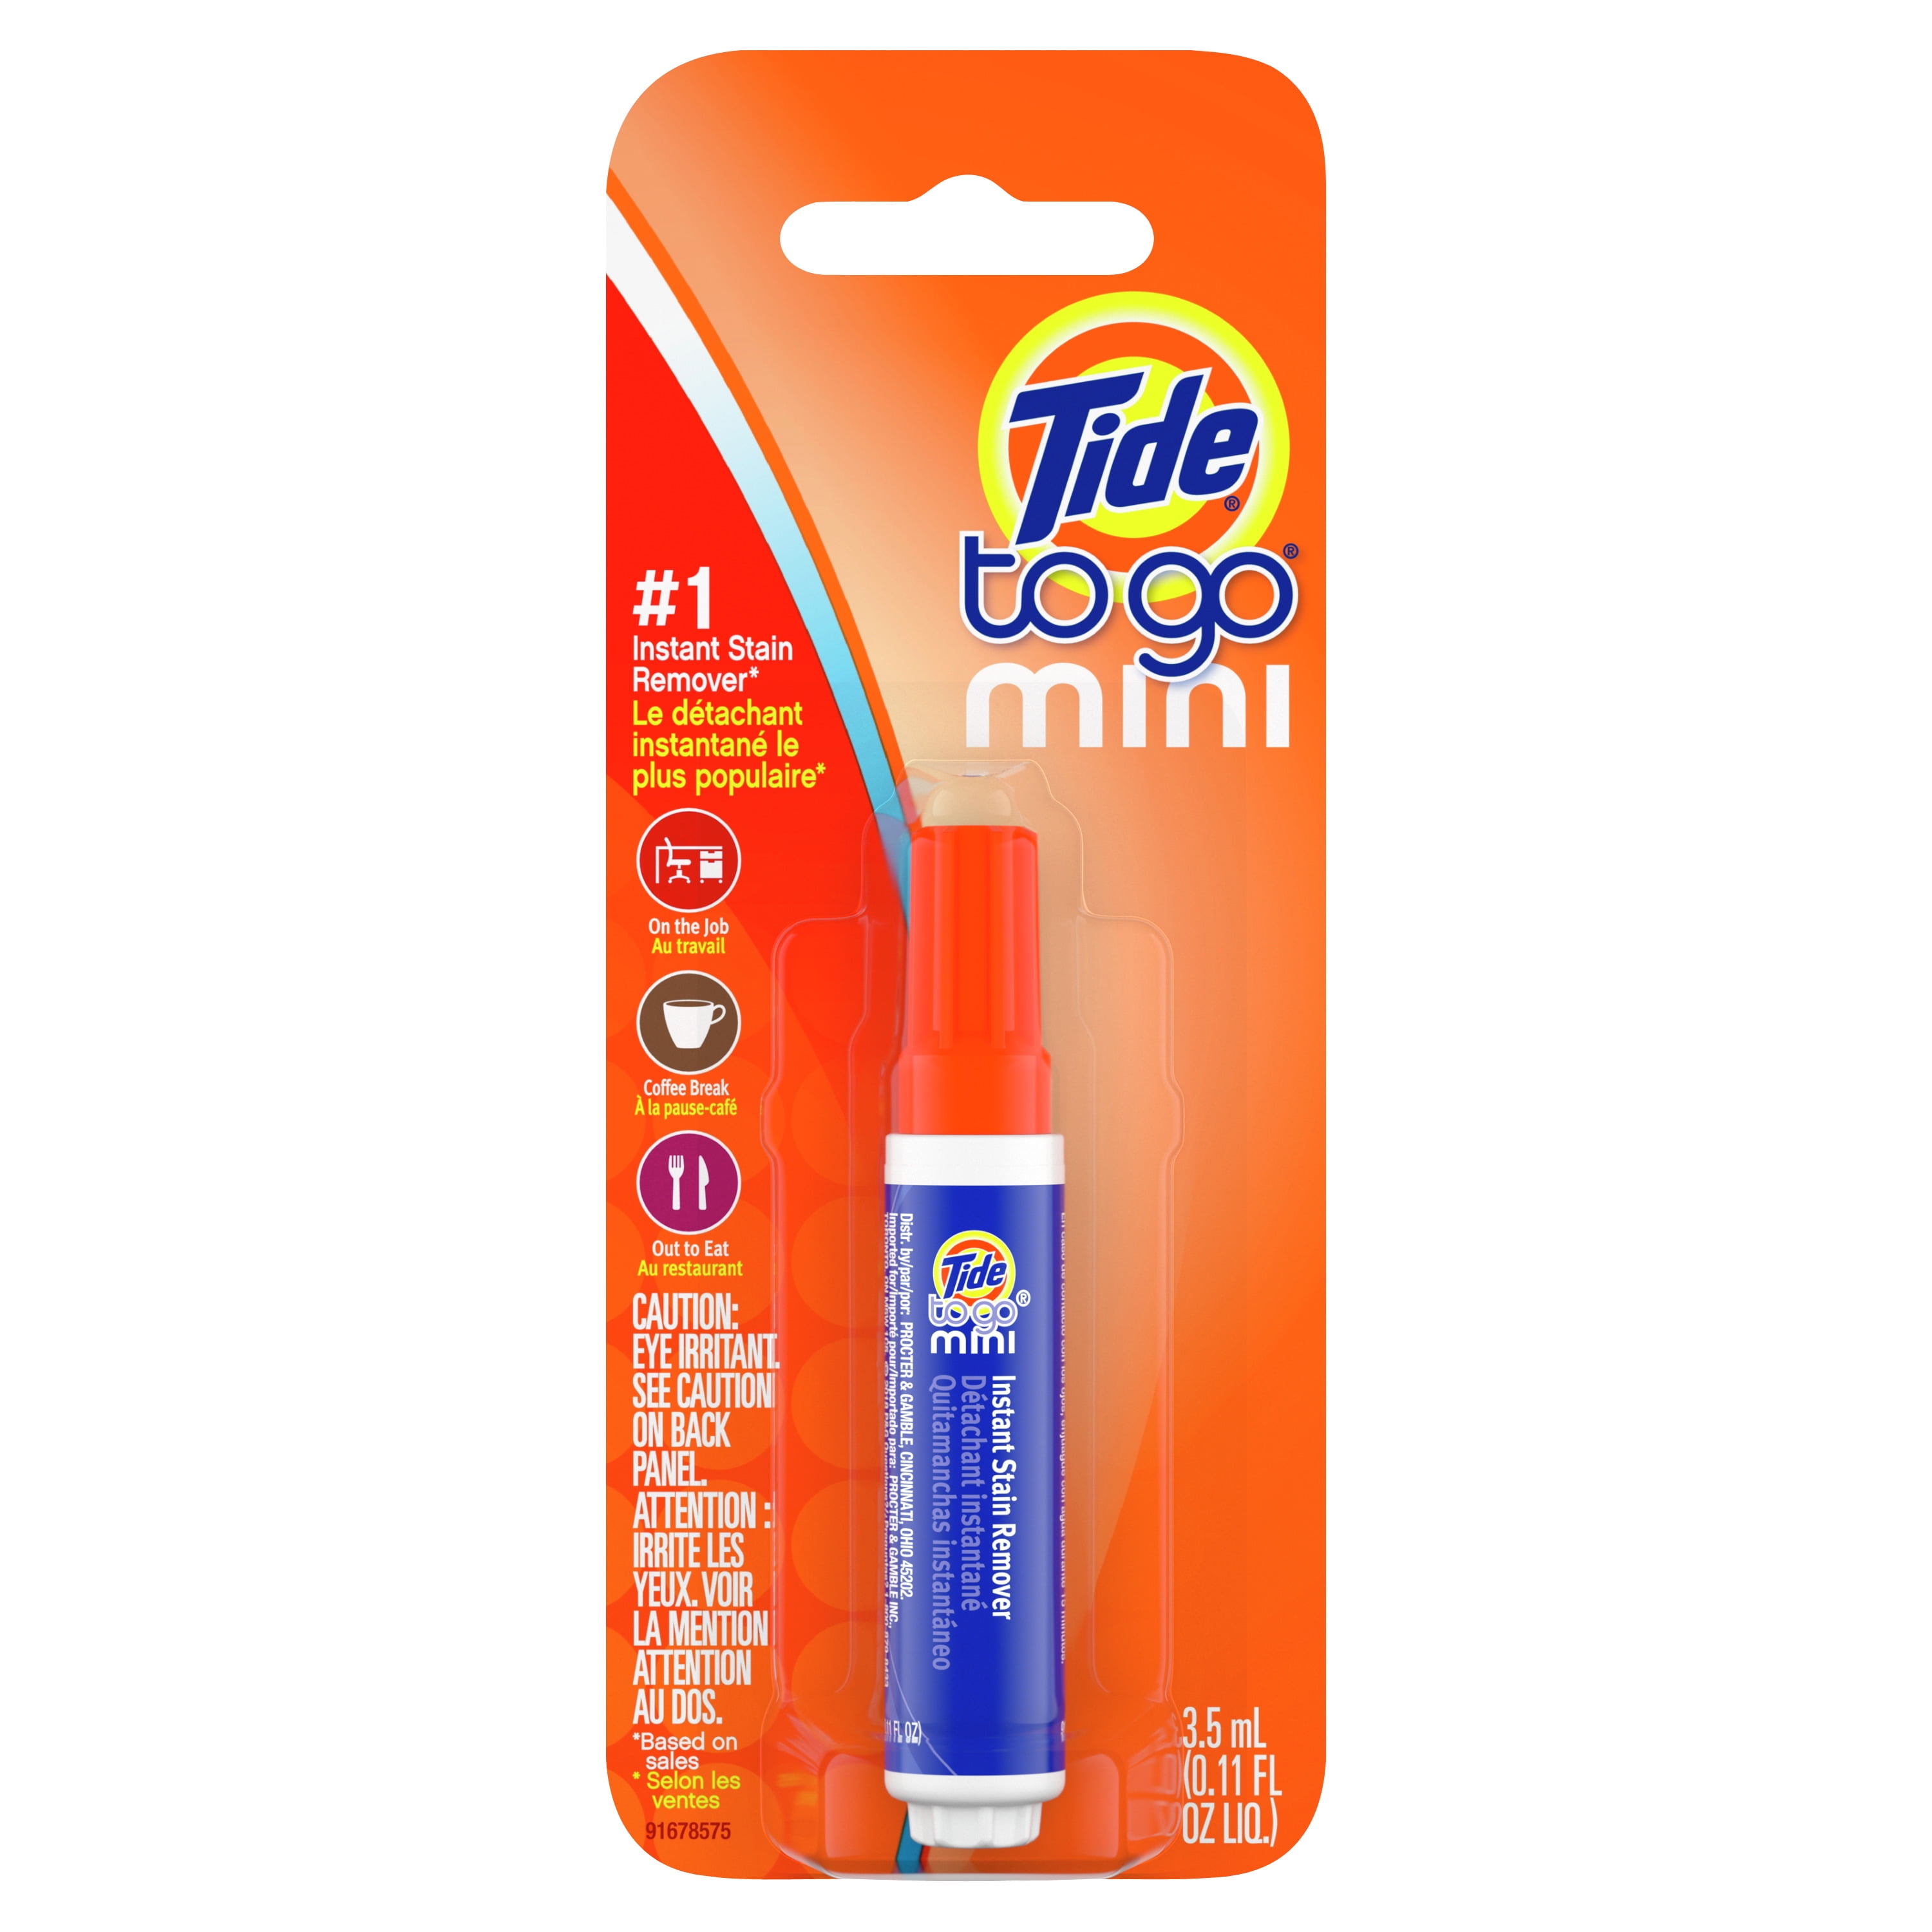 Tide To Go Instant Stain Remover pen 